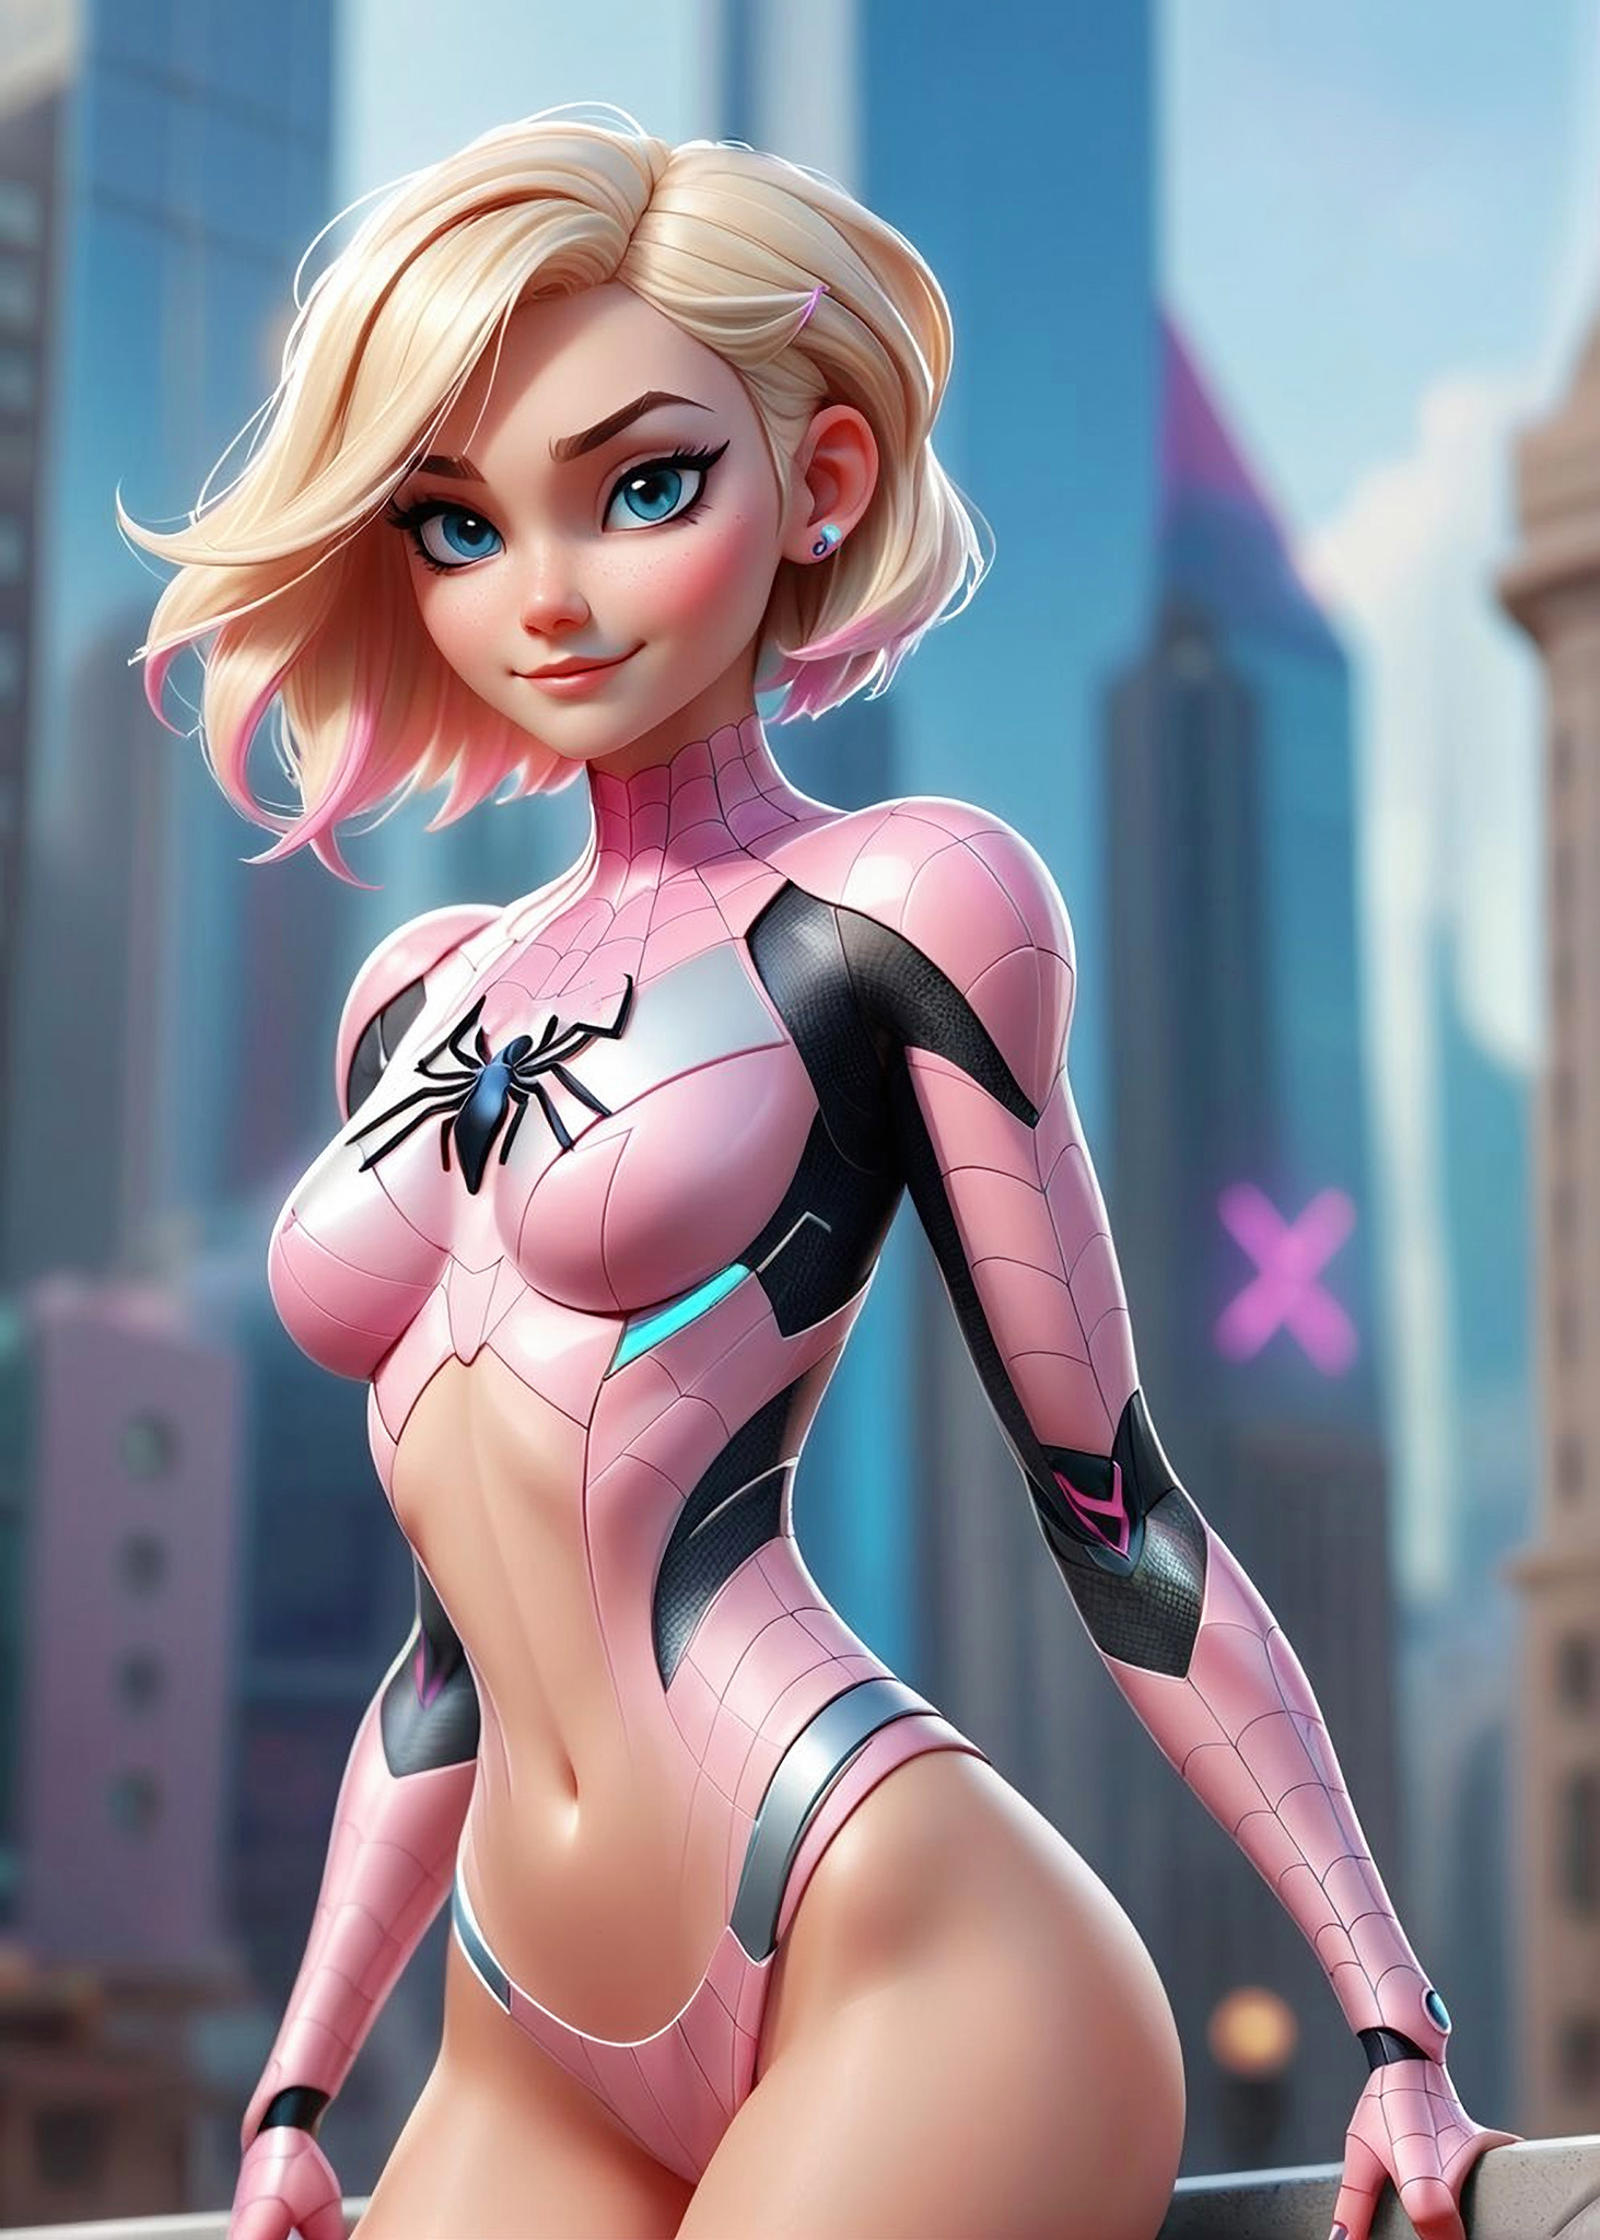 A 3D animated digital art of a girl wearing a pink and black spider suit.